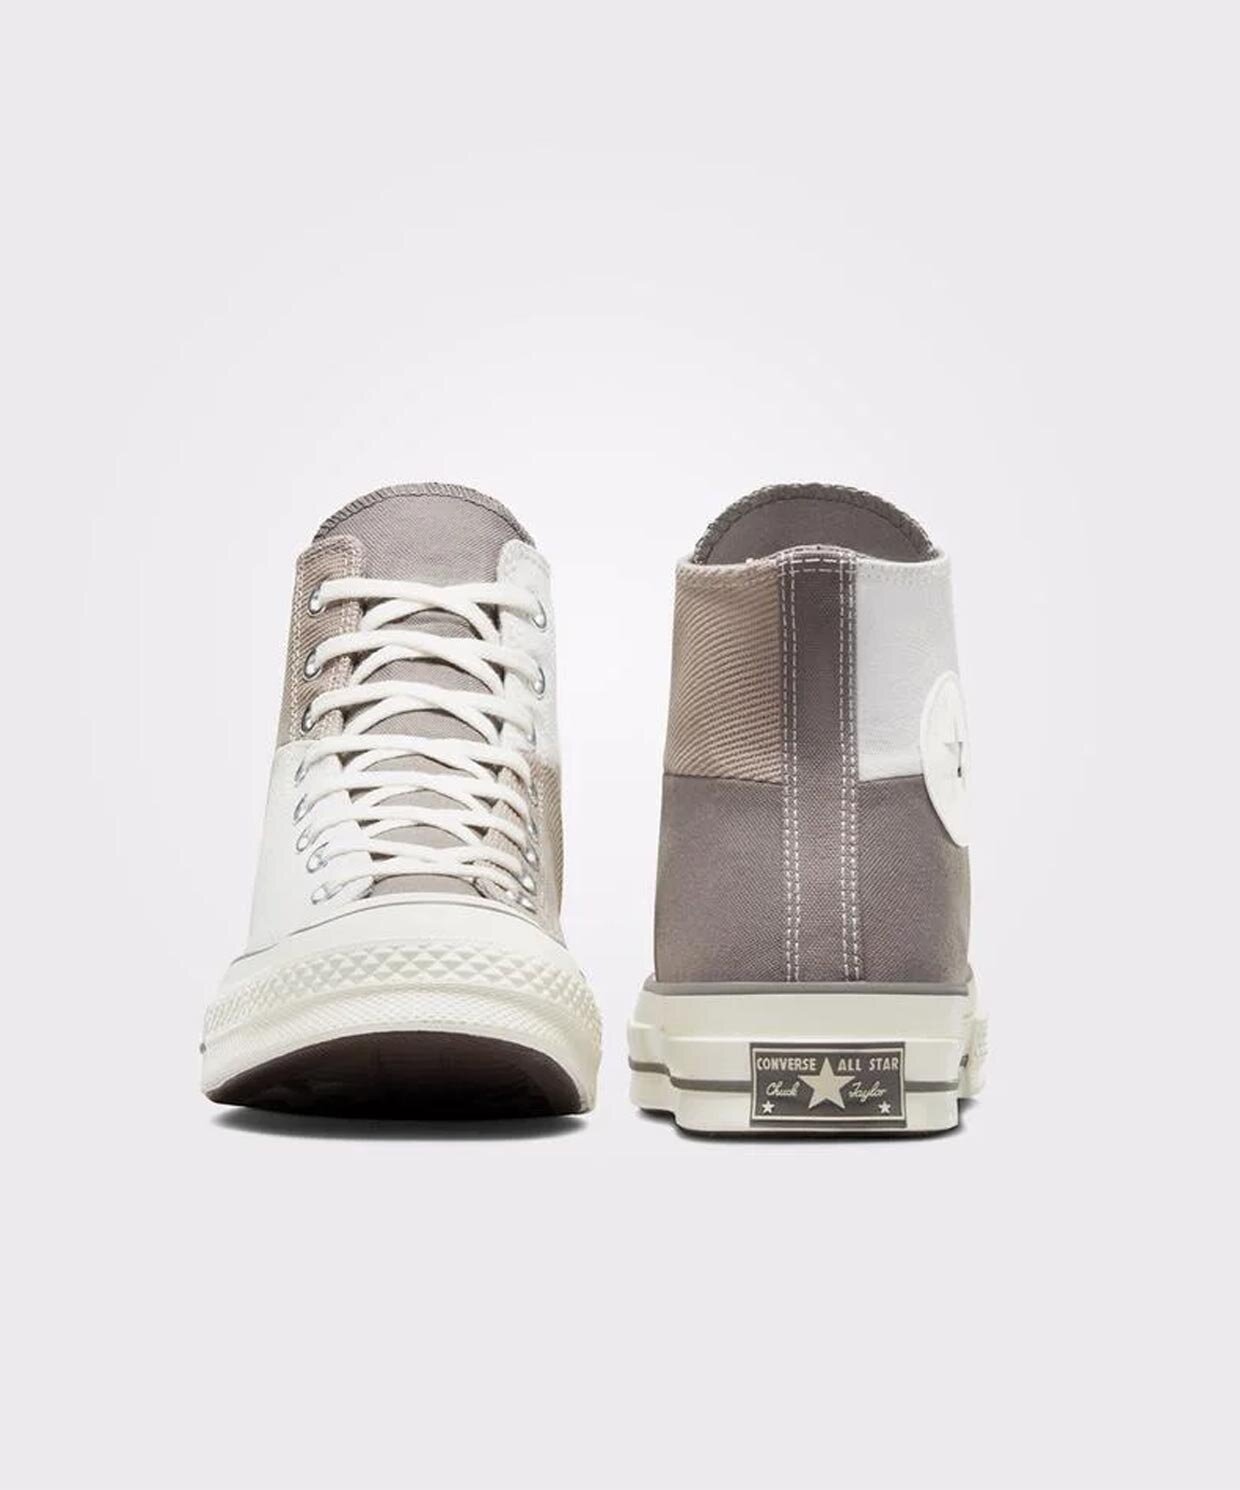 Converse Chuck 70 Crafted Ollie Patch